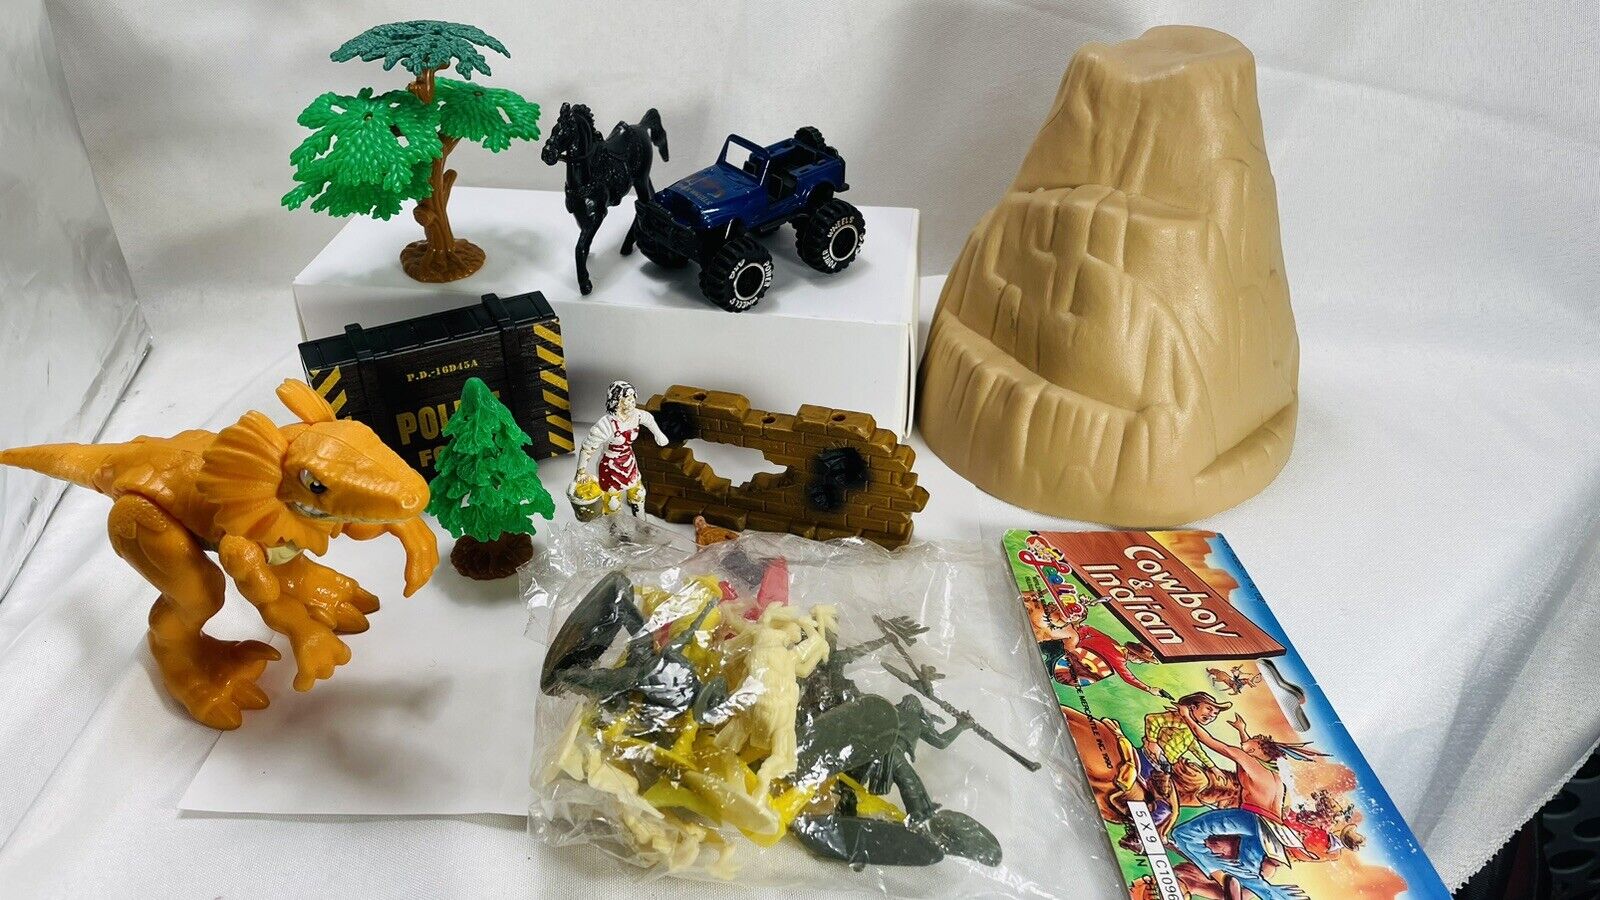 Junk Drawer Lot of Cowboys And Indians, Dinosaur, Trees, Jeep And More Toys